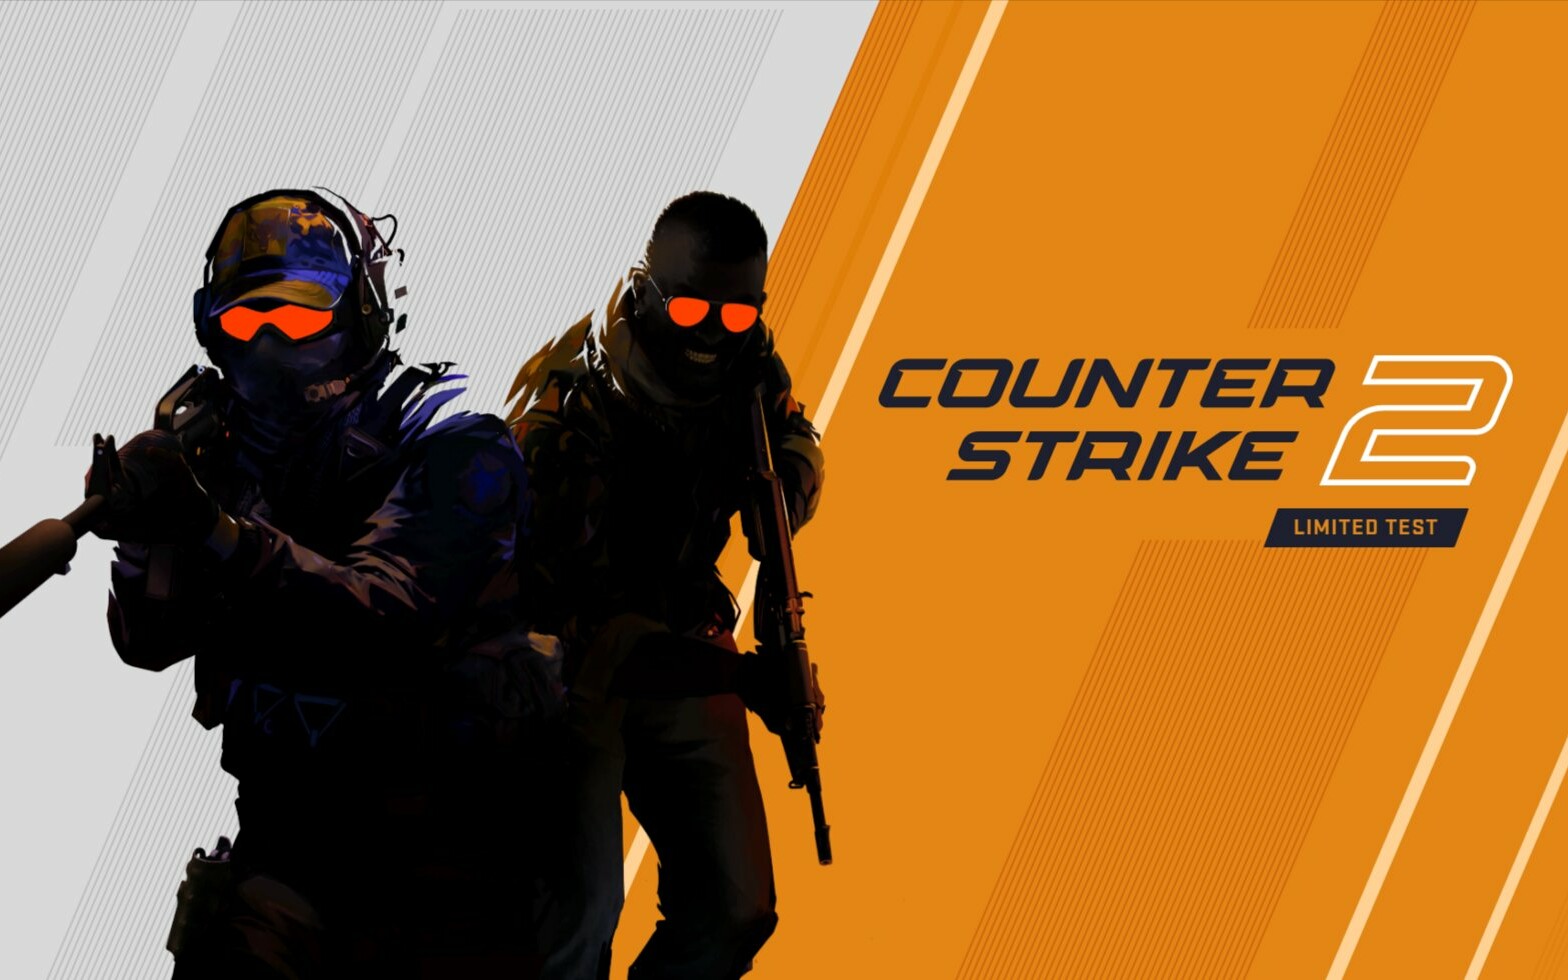 The announcement of Counter-Strike 2 is the biggest disappointment in Valve’s history